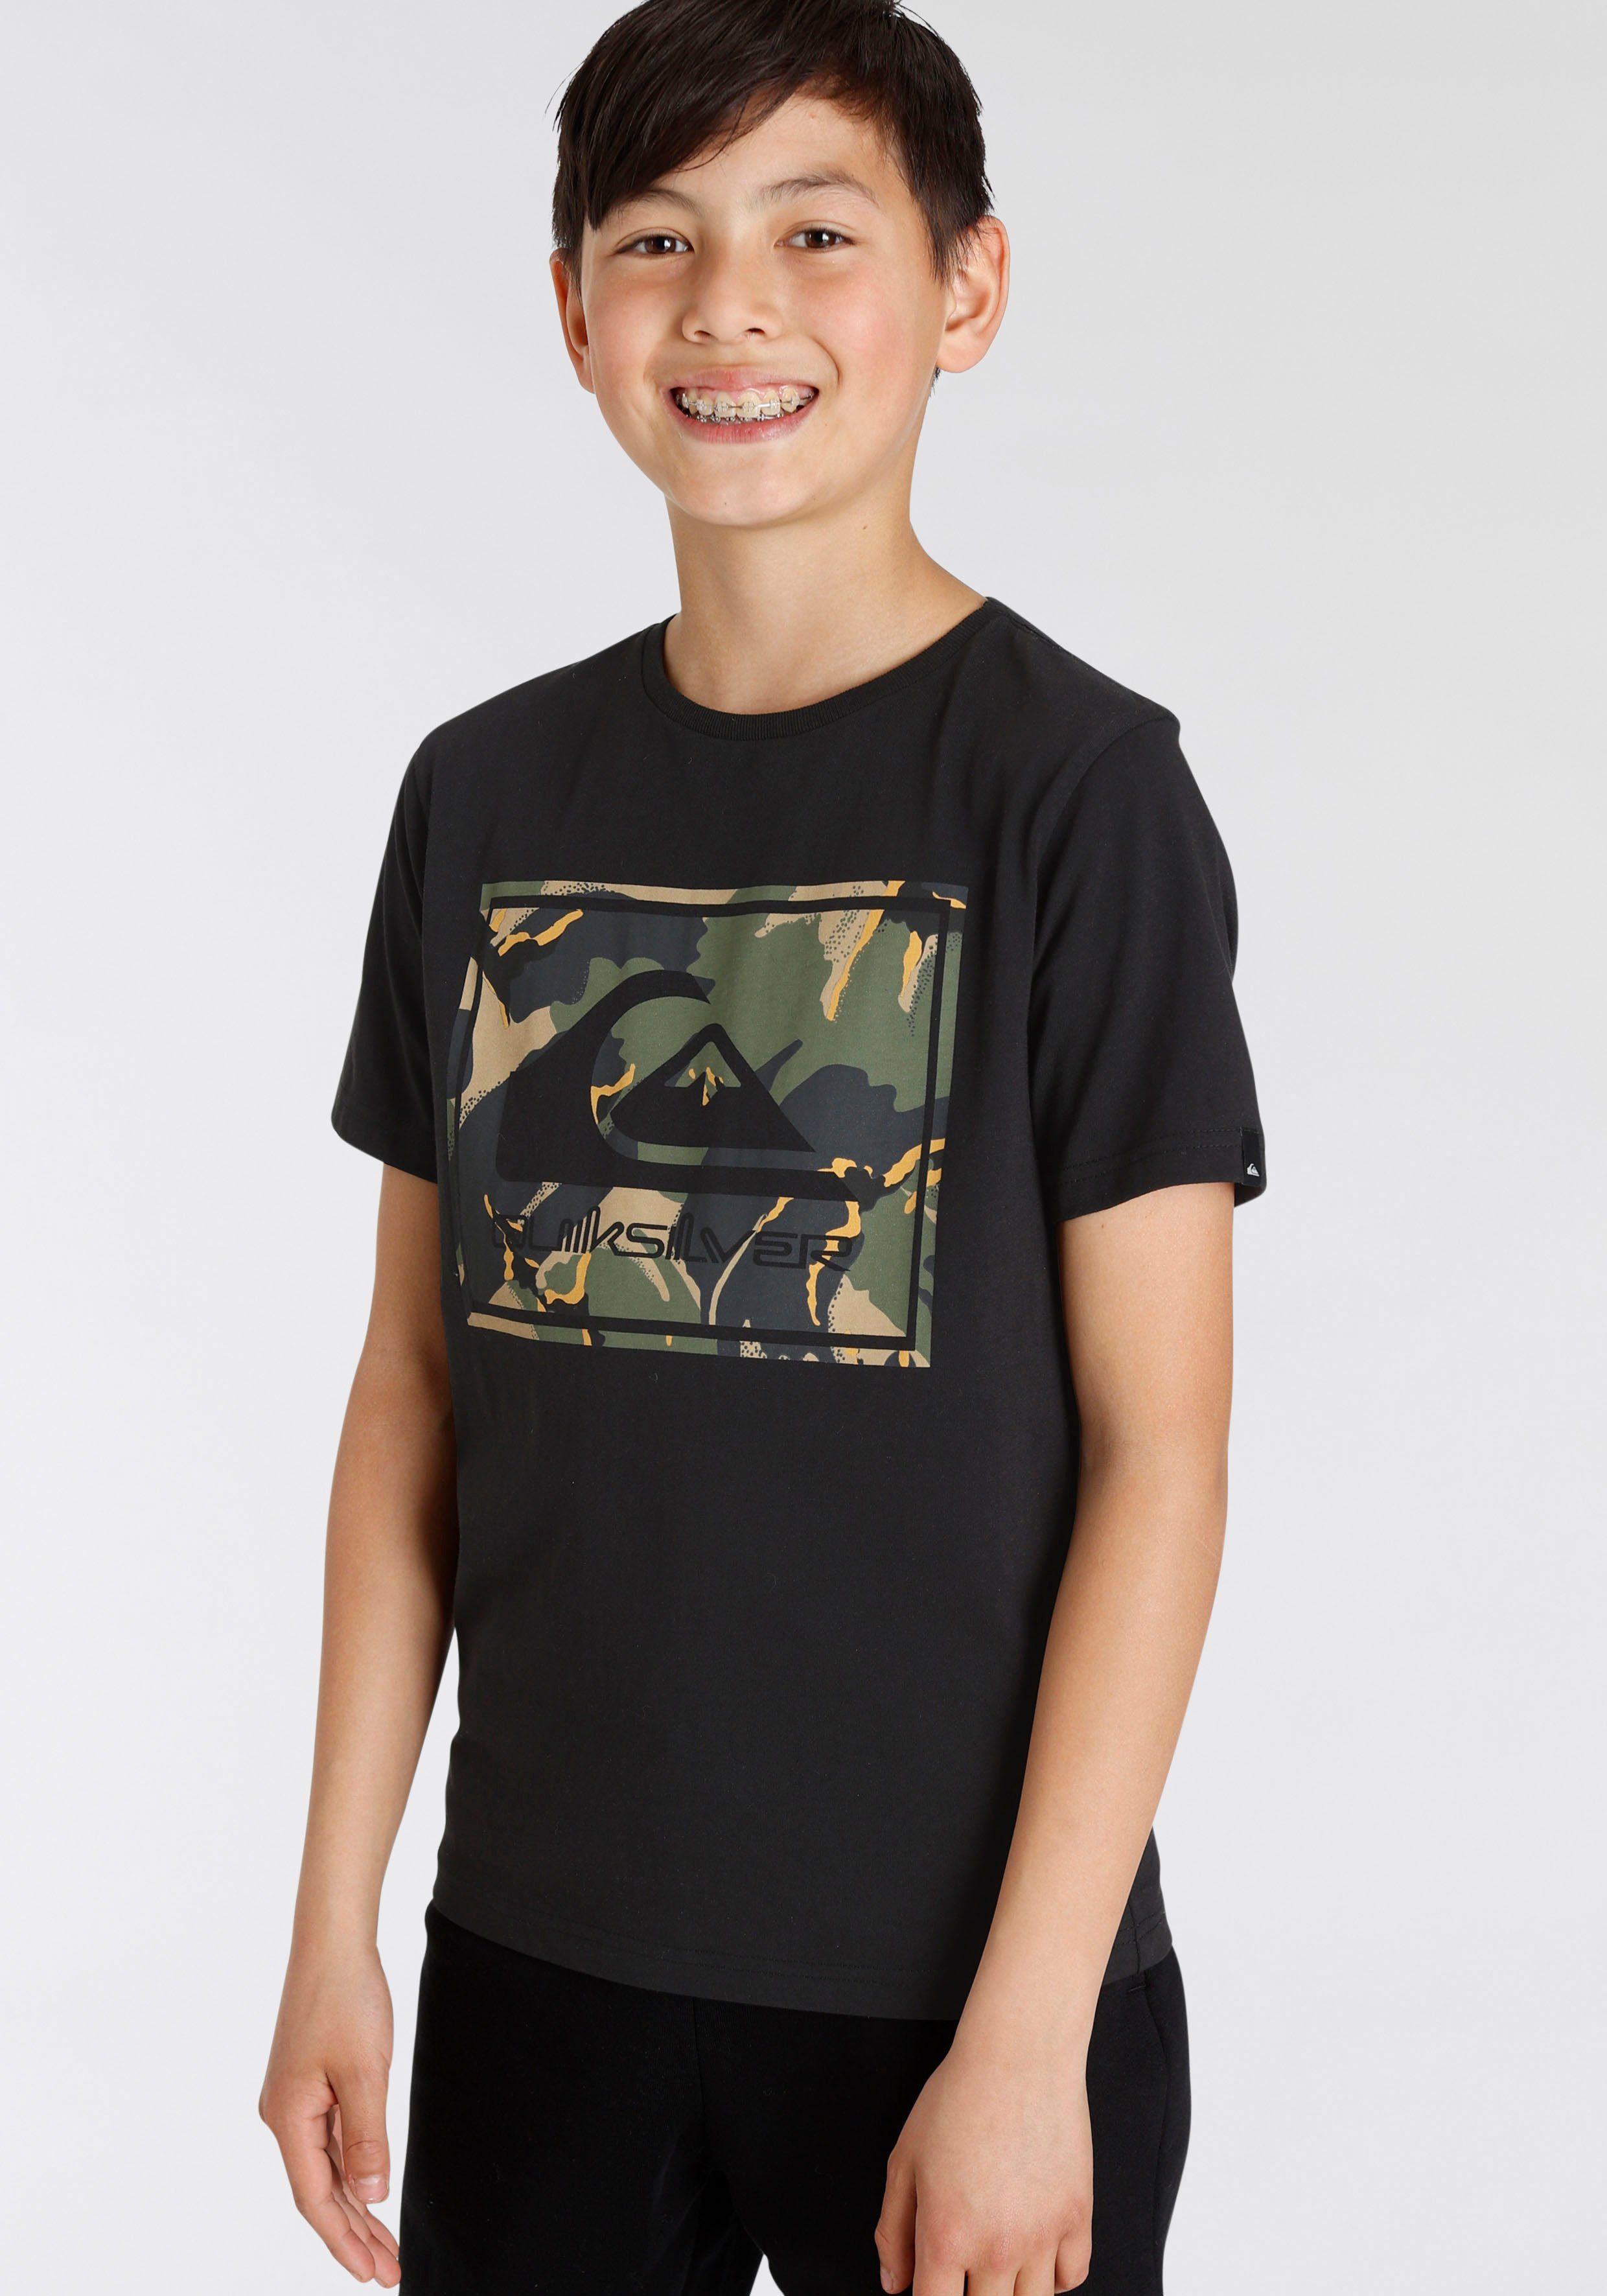 Quiksilver PACK YOUTH SHORT - ARCHICAMO SLEEVE Kinder T-Shirt TEE für